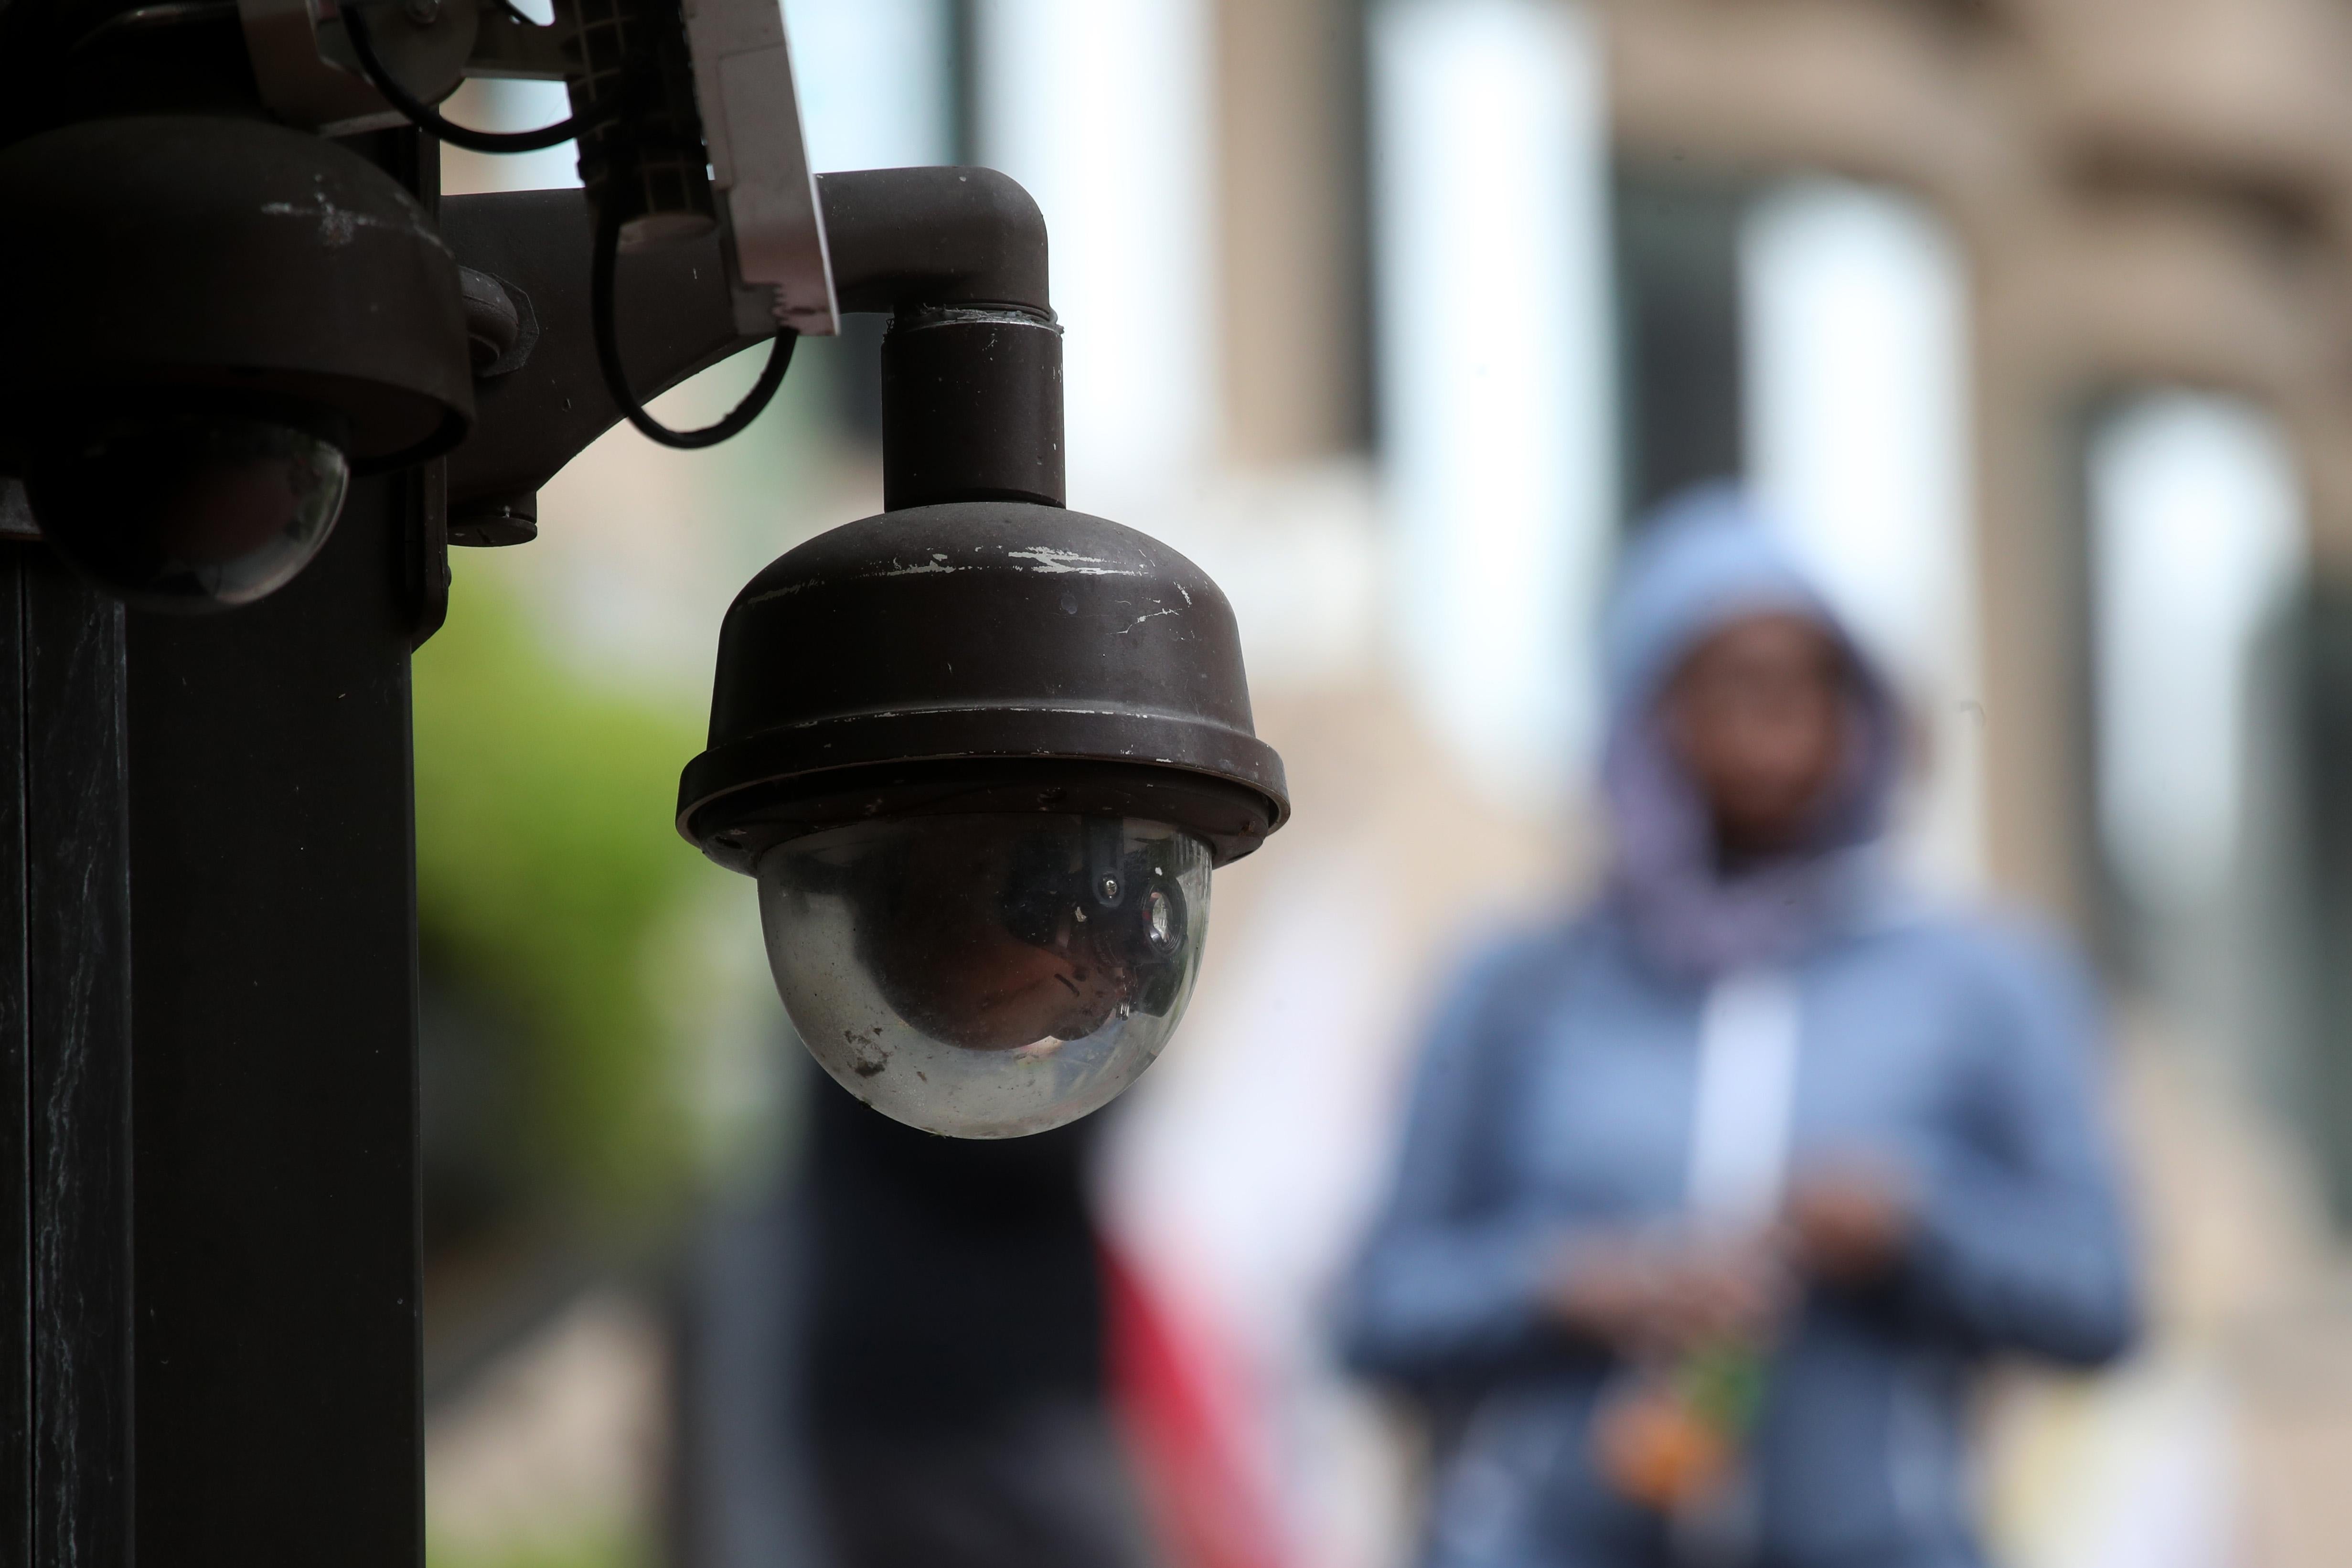 In the foreground, a surveillance camera; in the background, a person wearing a hoodie.